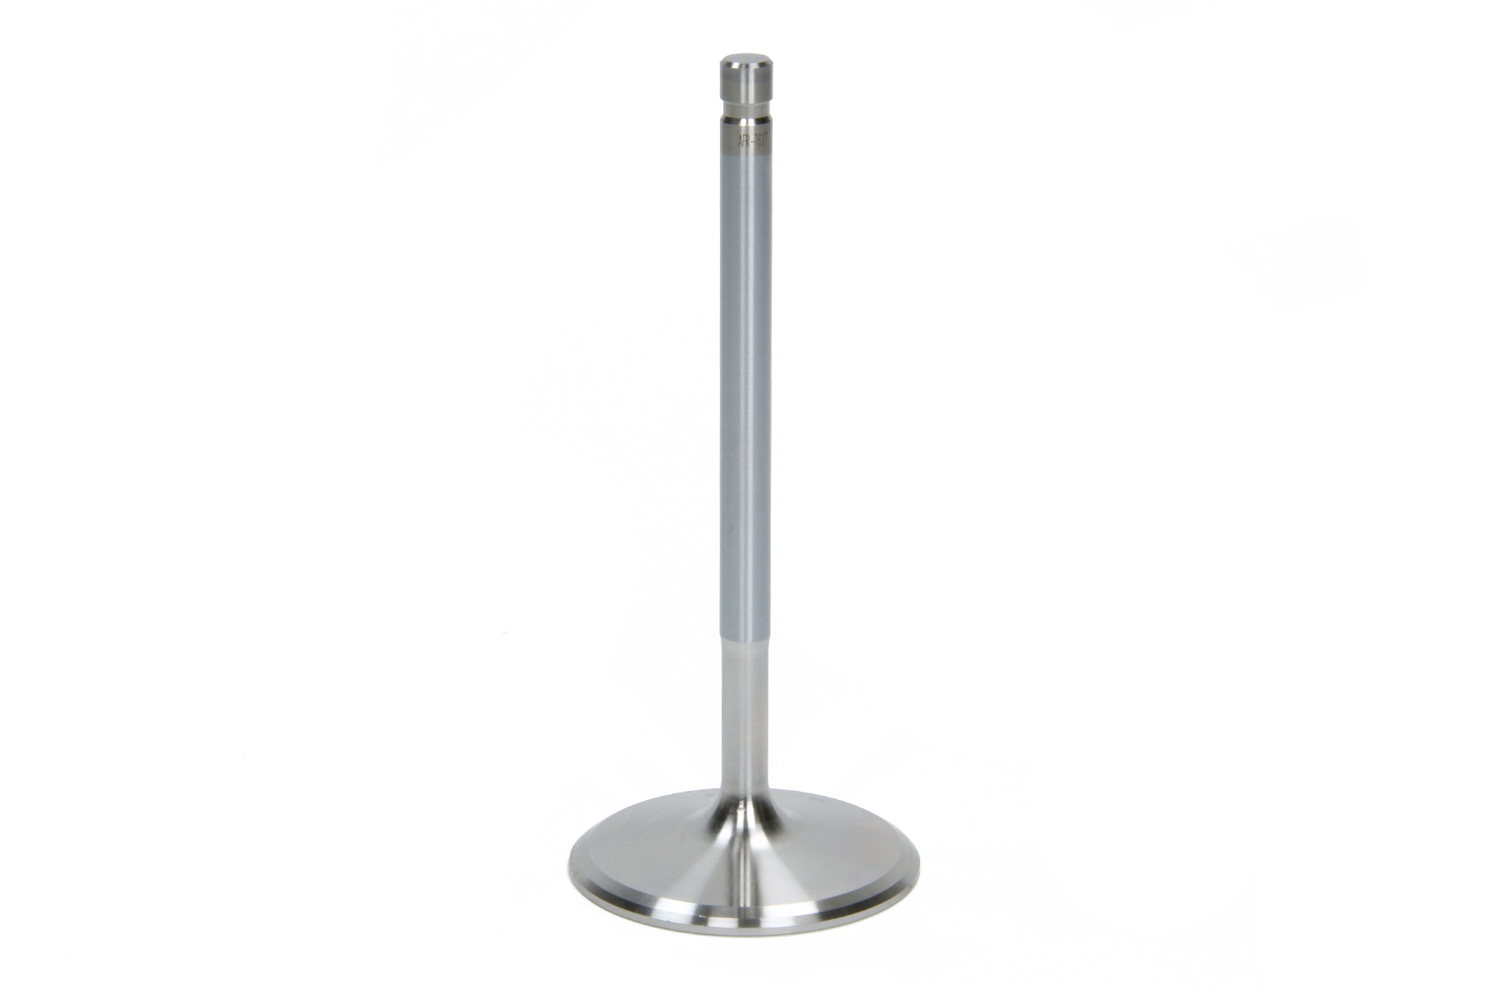 Air Flow Research 7208-1 Intake Valve, LSx, 2.080 in Head, 8 mm Stem, 4.900 in Long, Stainless, GM LS-Series, Each